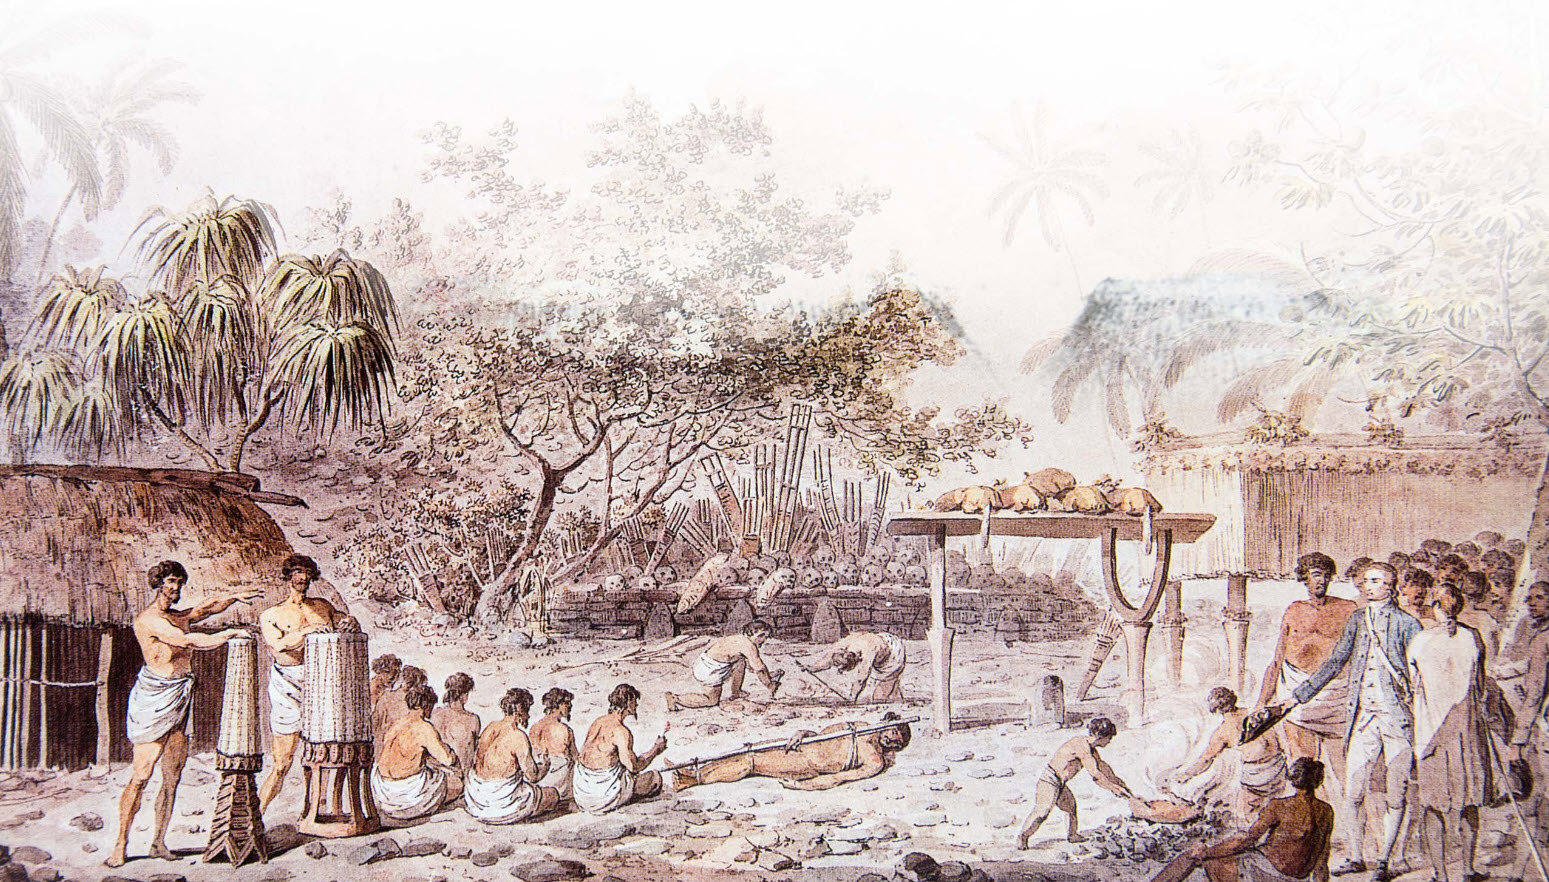 drawing/picture of Lapita People